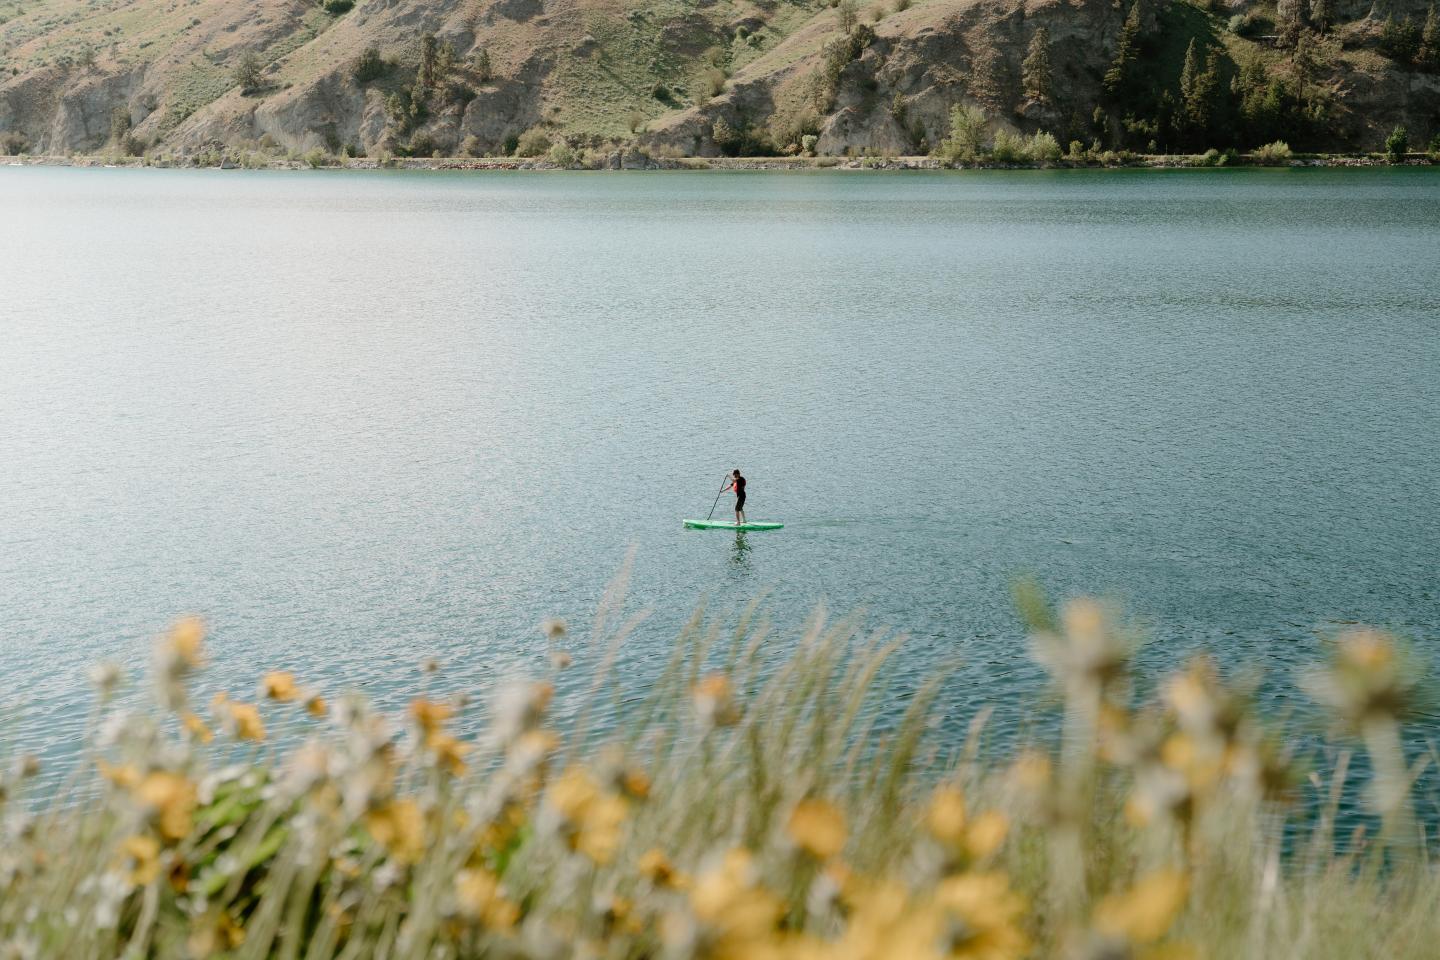 A person paddle boarding on a lake